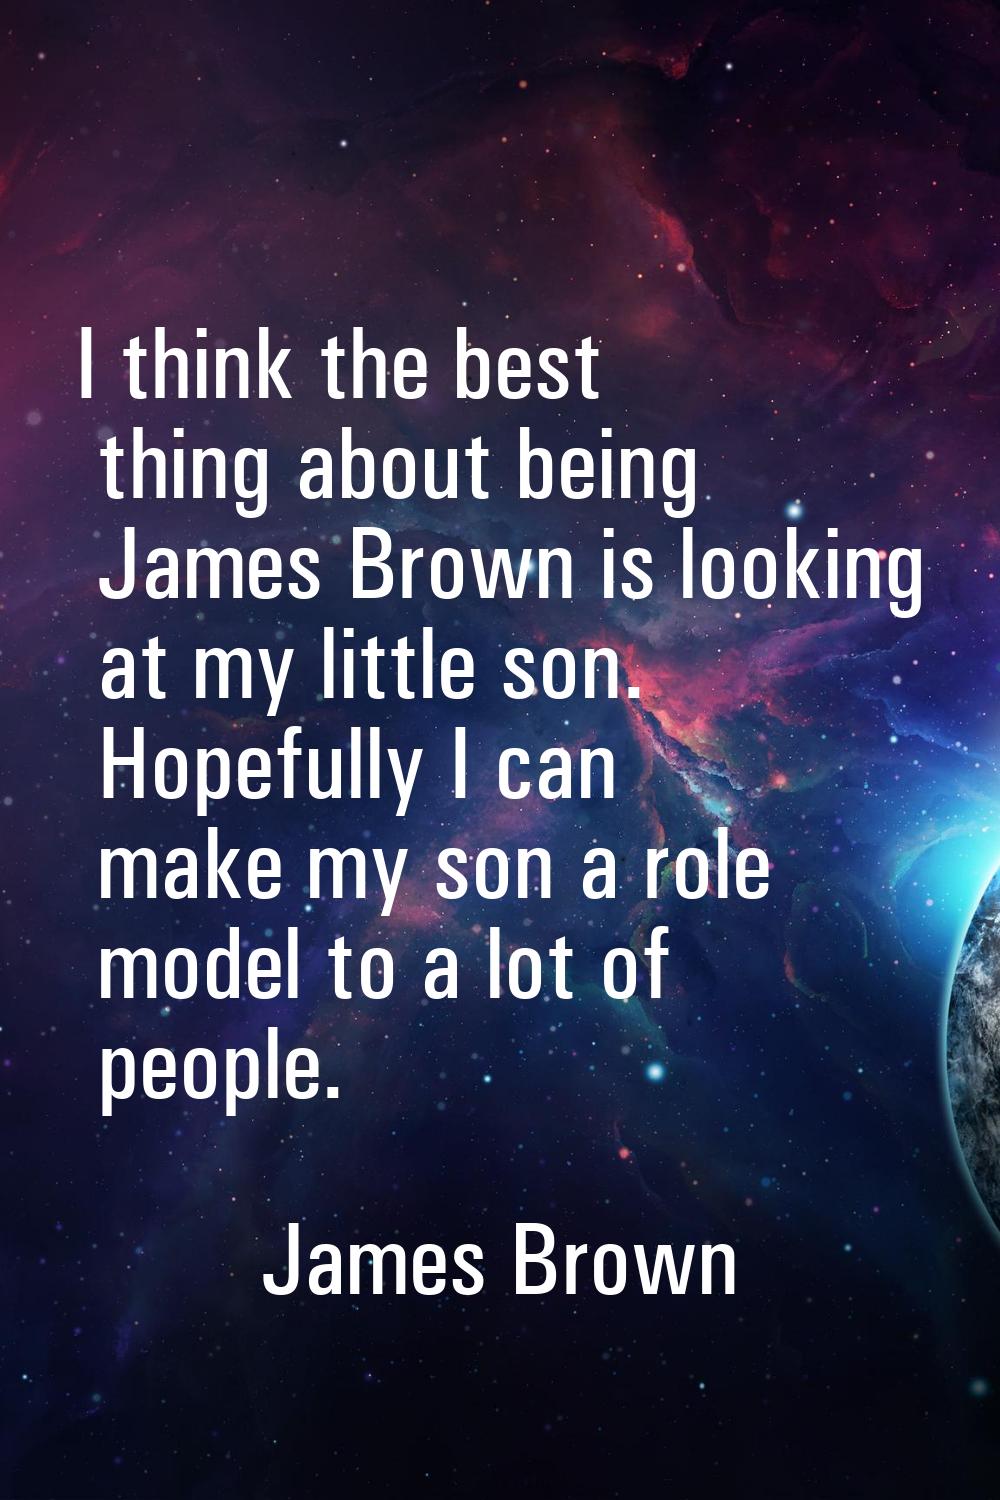 I think the best thing about being James Brown is looking at my little son. Hopefully I can make my